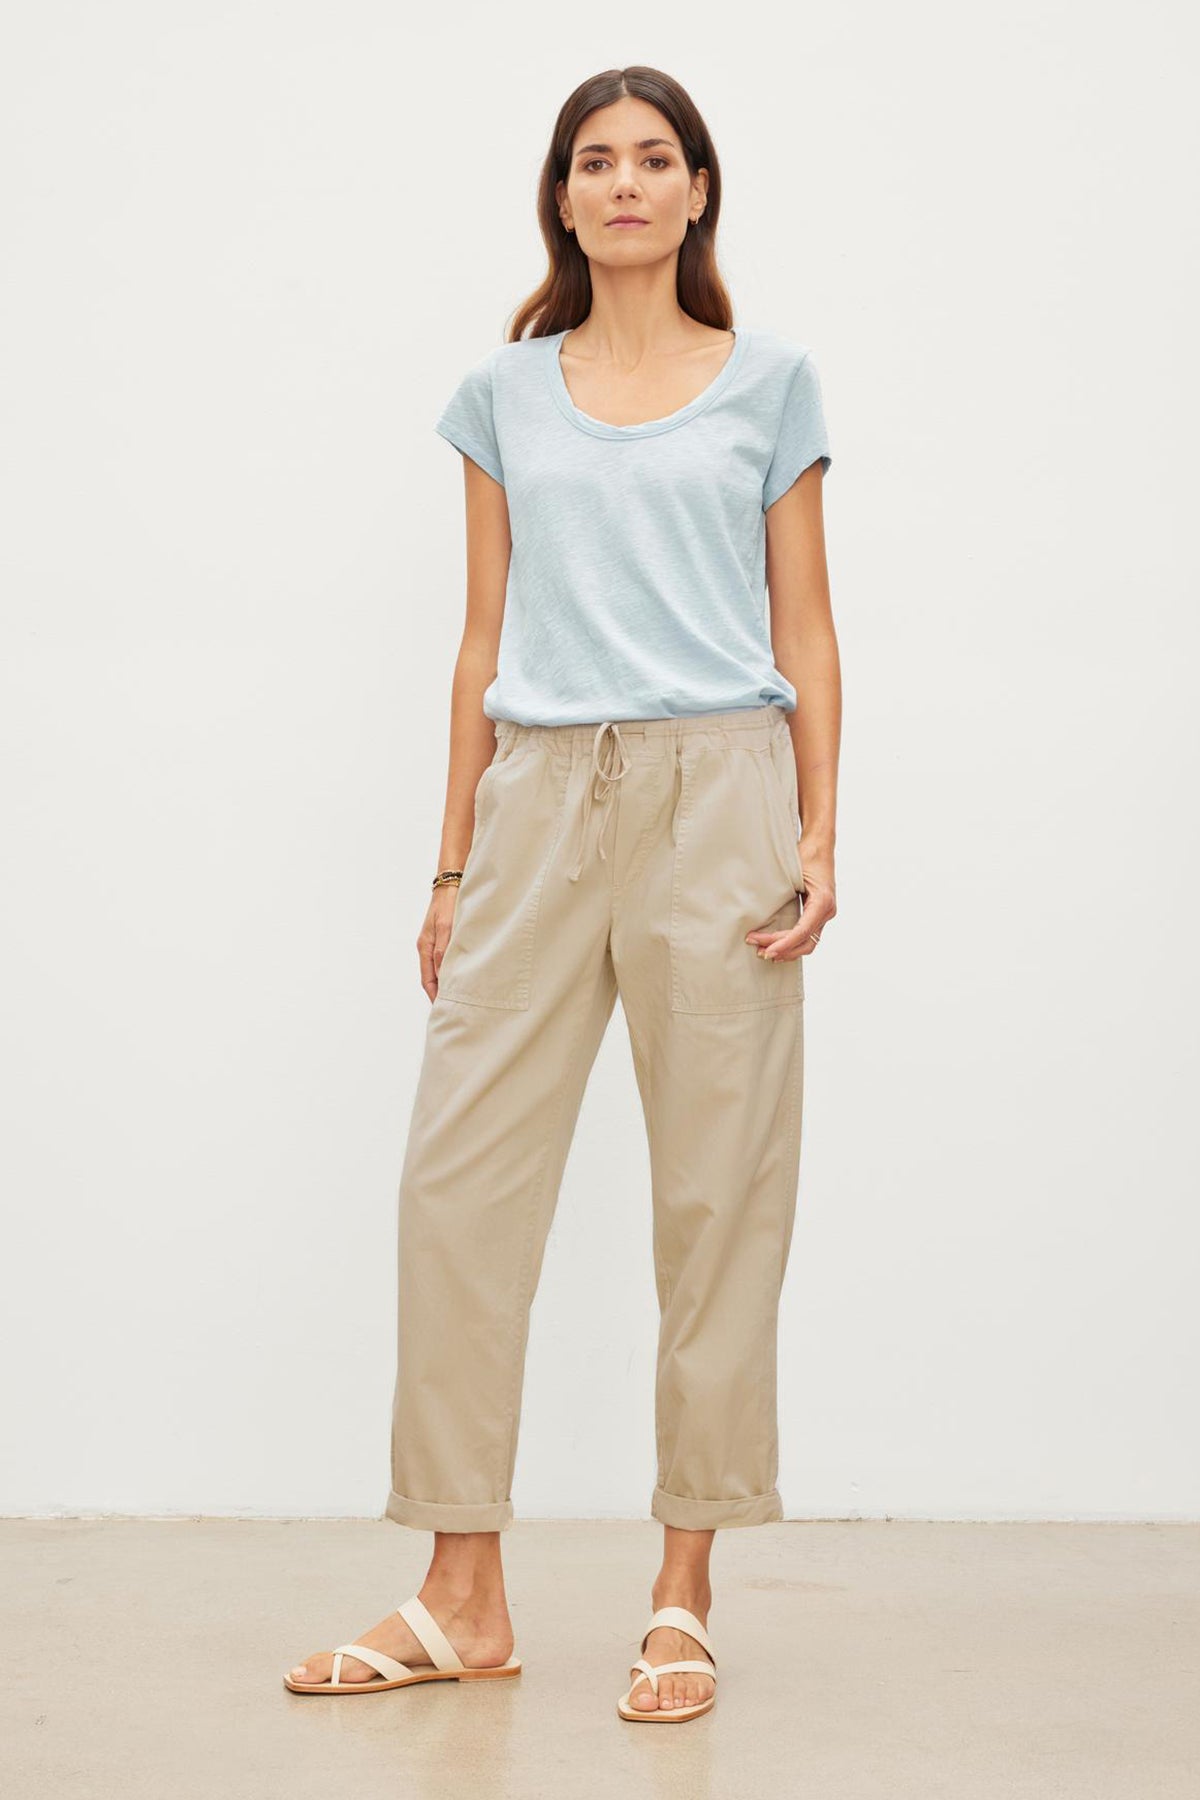 The model is wearing a blue t-shirt and Velvet by Graham & Spencer khaki pants. The MISTY COTTON TWILL PANT has an elastic waist and drawstring, providing comfort and adjustability.-36026026492097